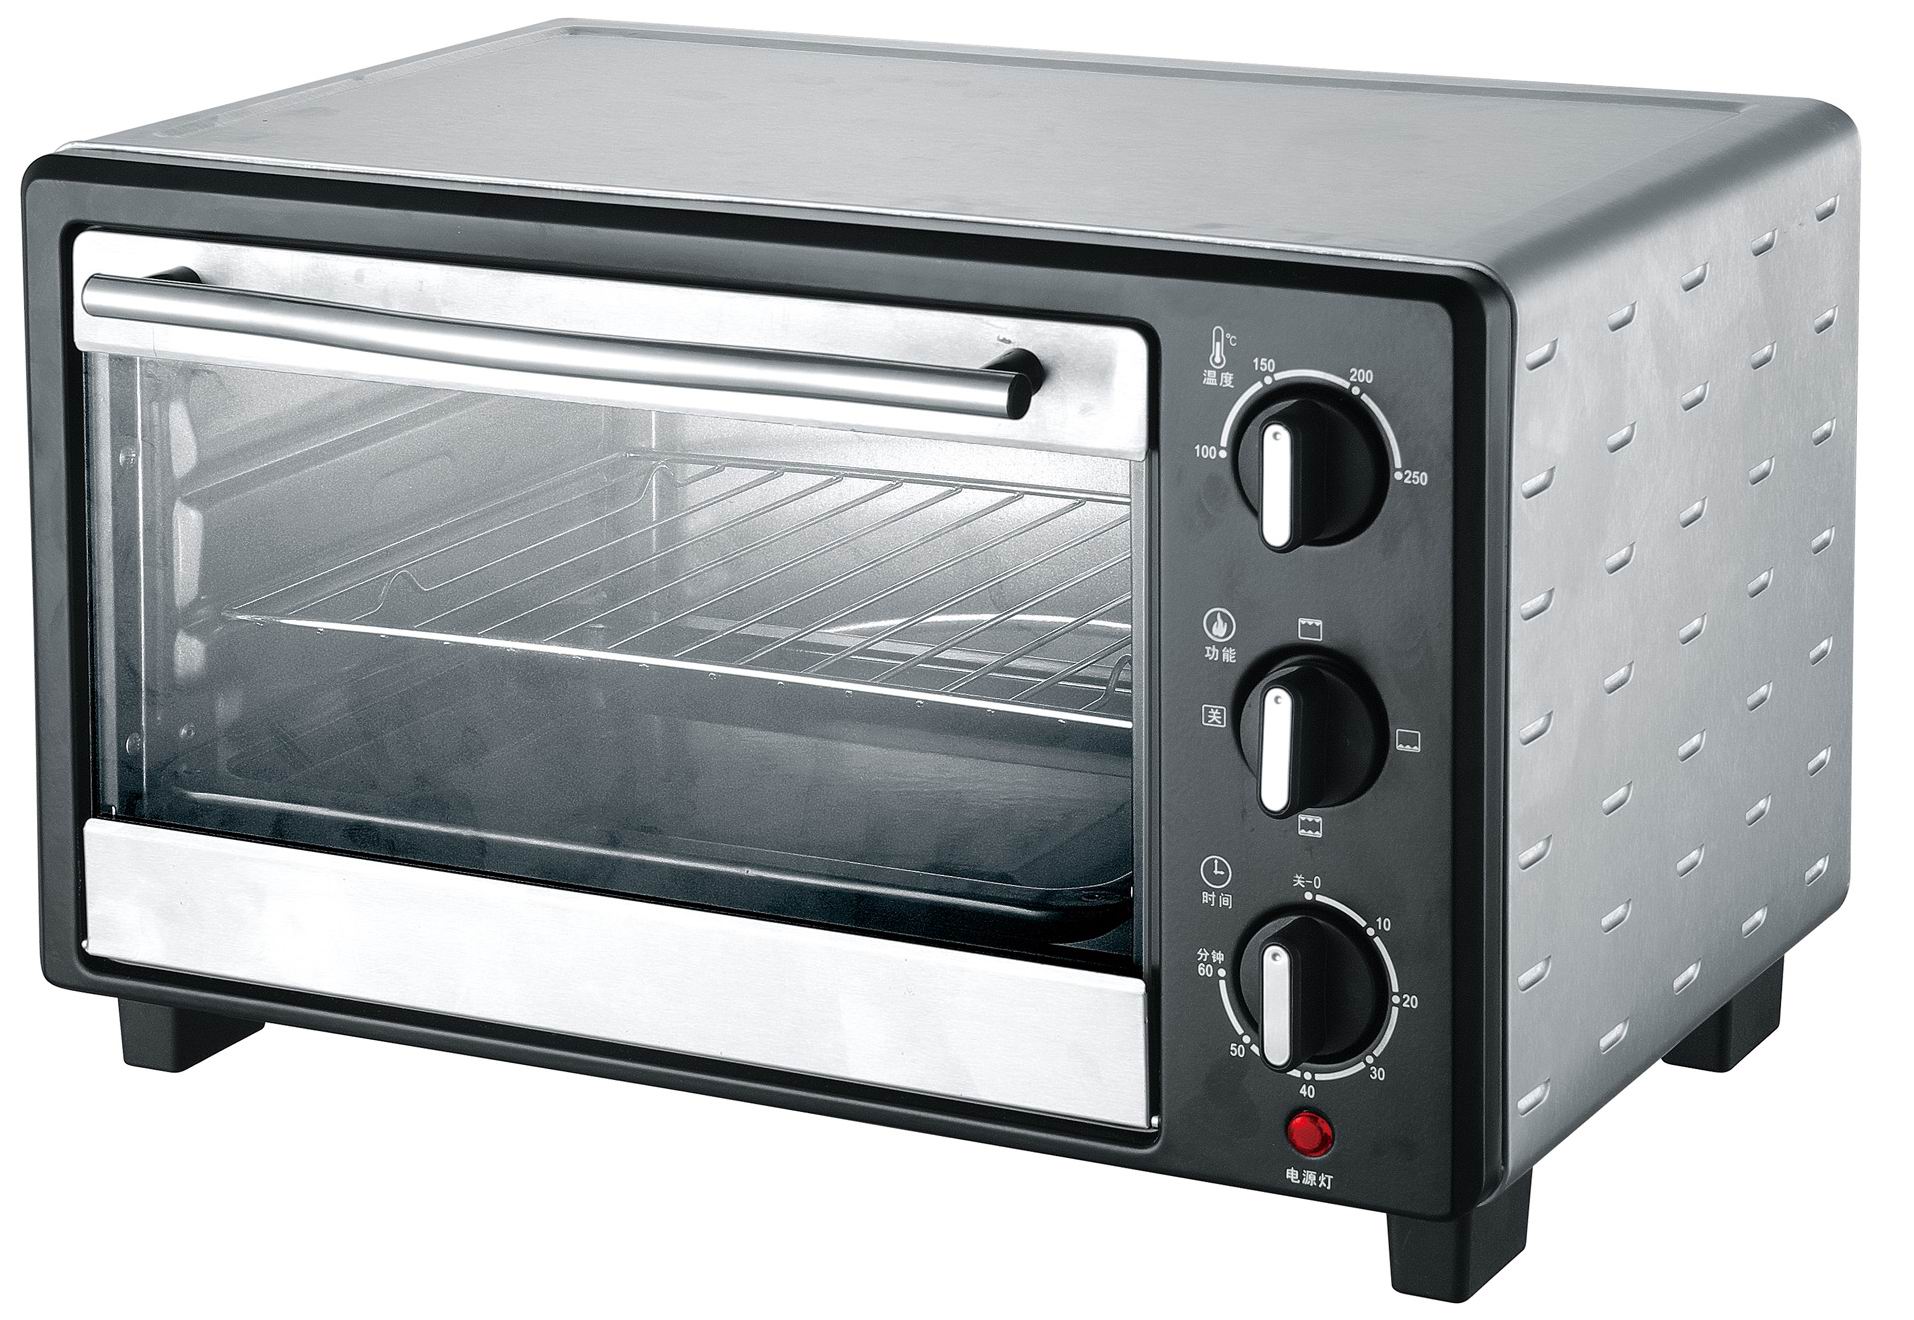 Electric Ovens with 60 mins timer with bell ring